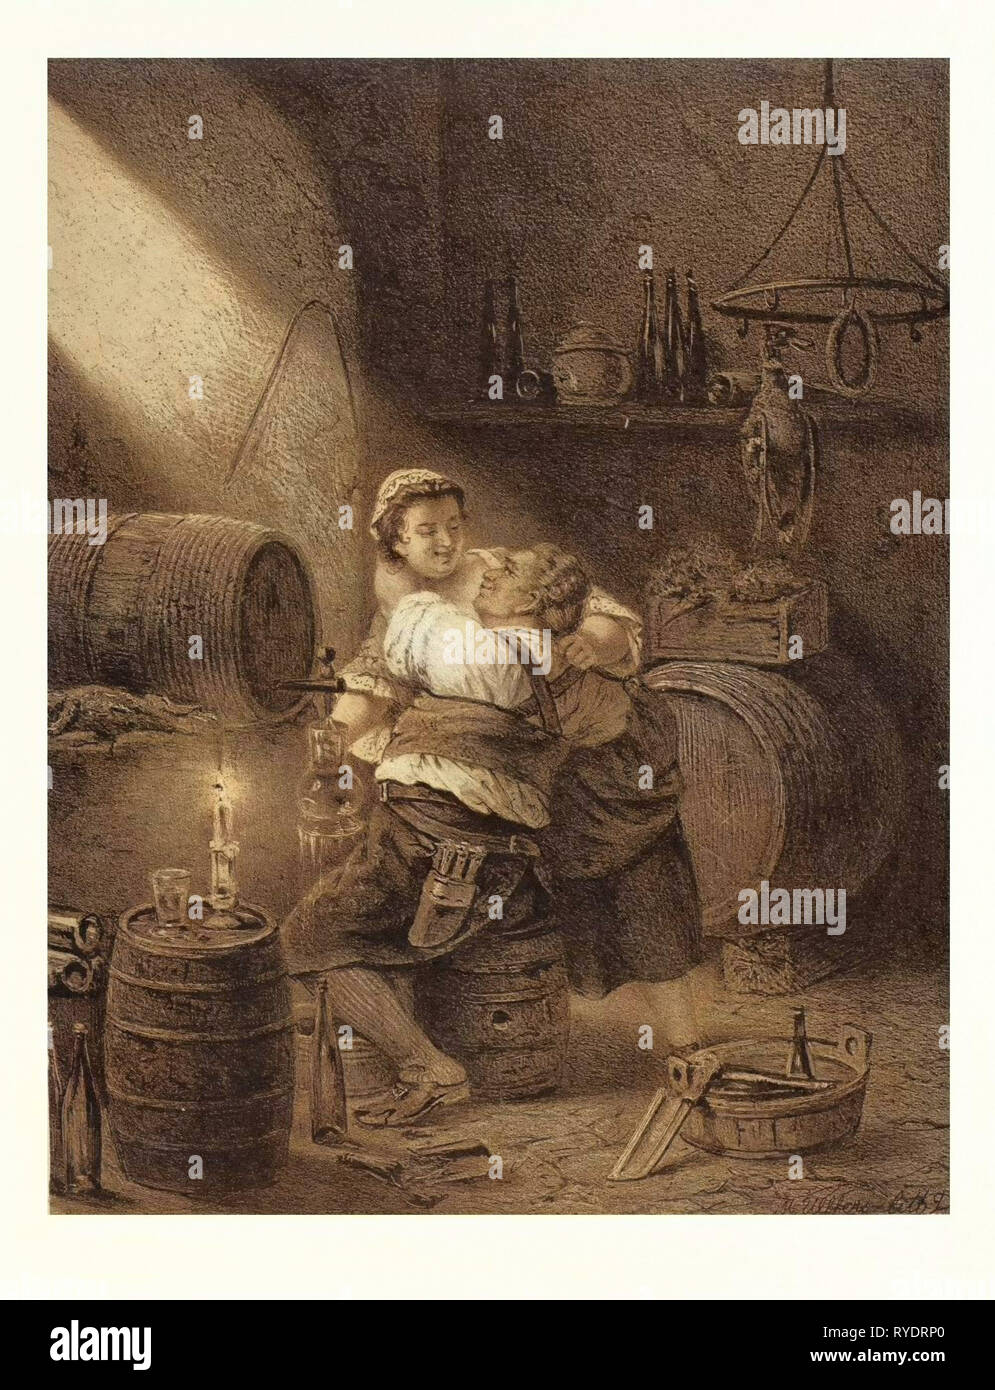 Love in the Winecellar, Barrel, Wine, Man, Woman, Male, Female, Barrel, Bottle, Glass, Candle, 19th Century, Food and Drink, Liszt Gourmet Archive, Cellar, Storage, Alcoholic, Wine-Barrel, Alcohol Stock Photo